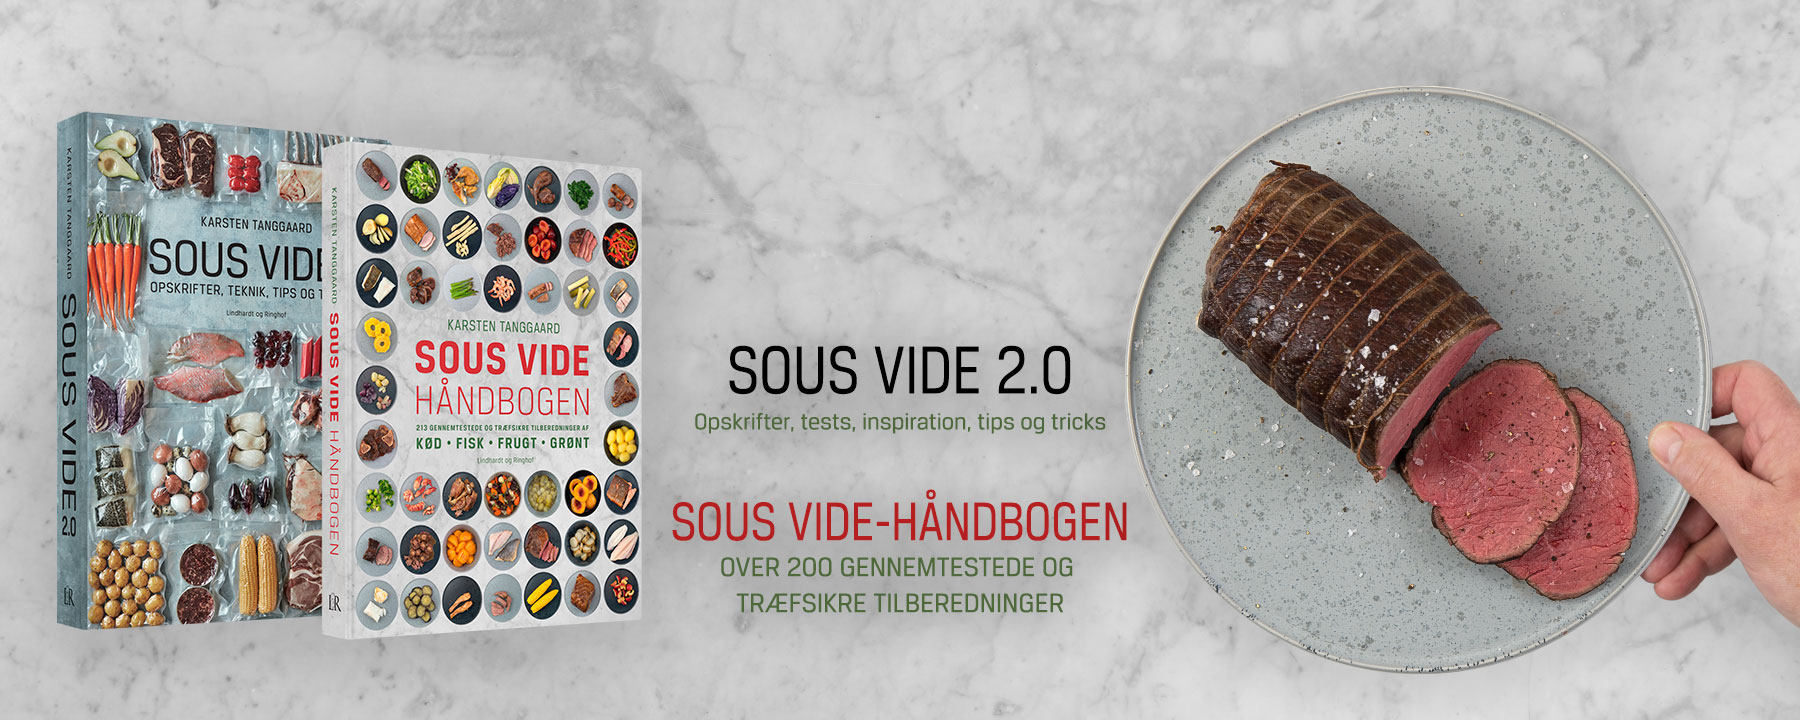 homepage-front-roastbeef Sous vide 2.0